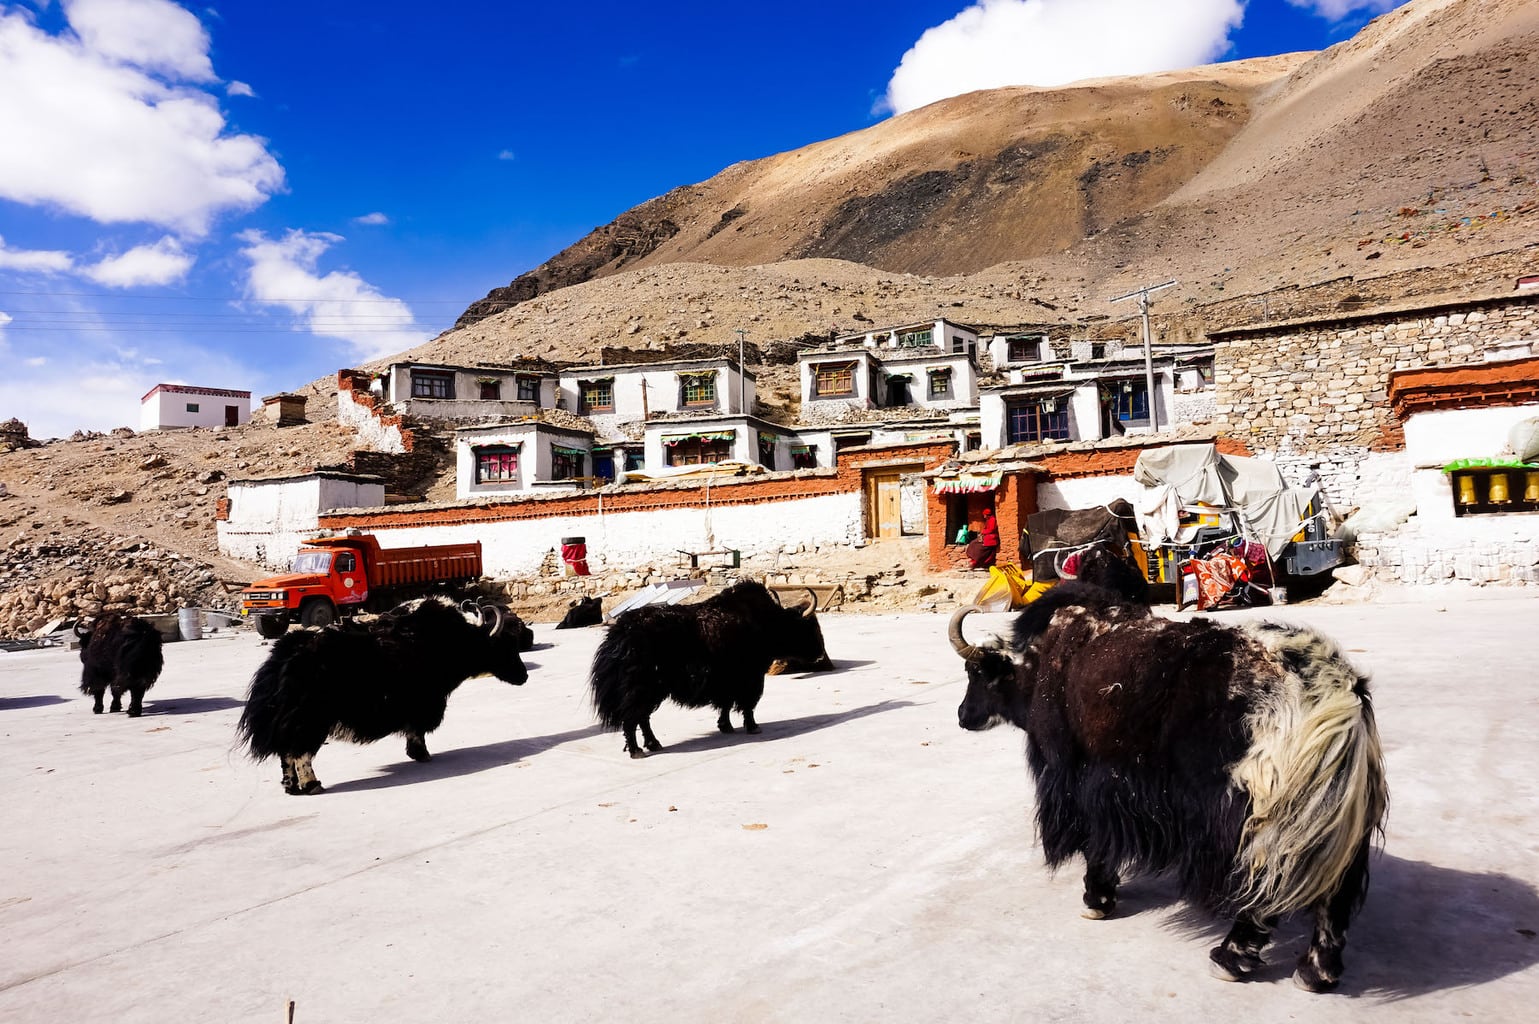 Yaks in high altitudes